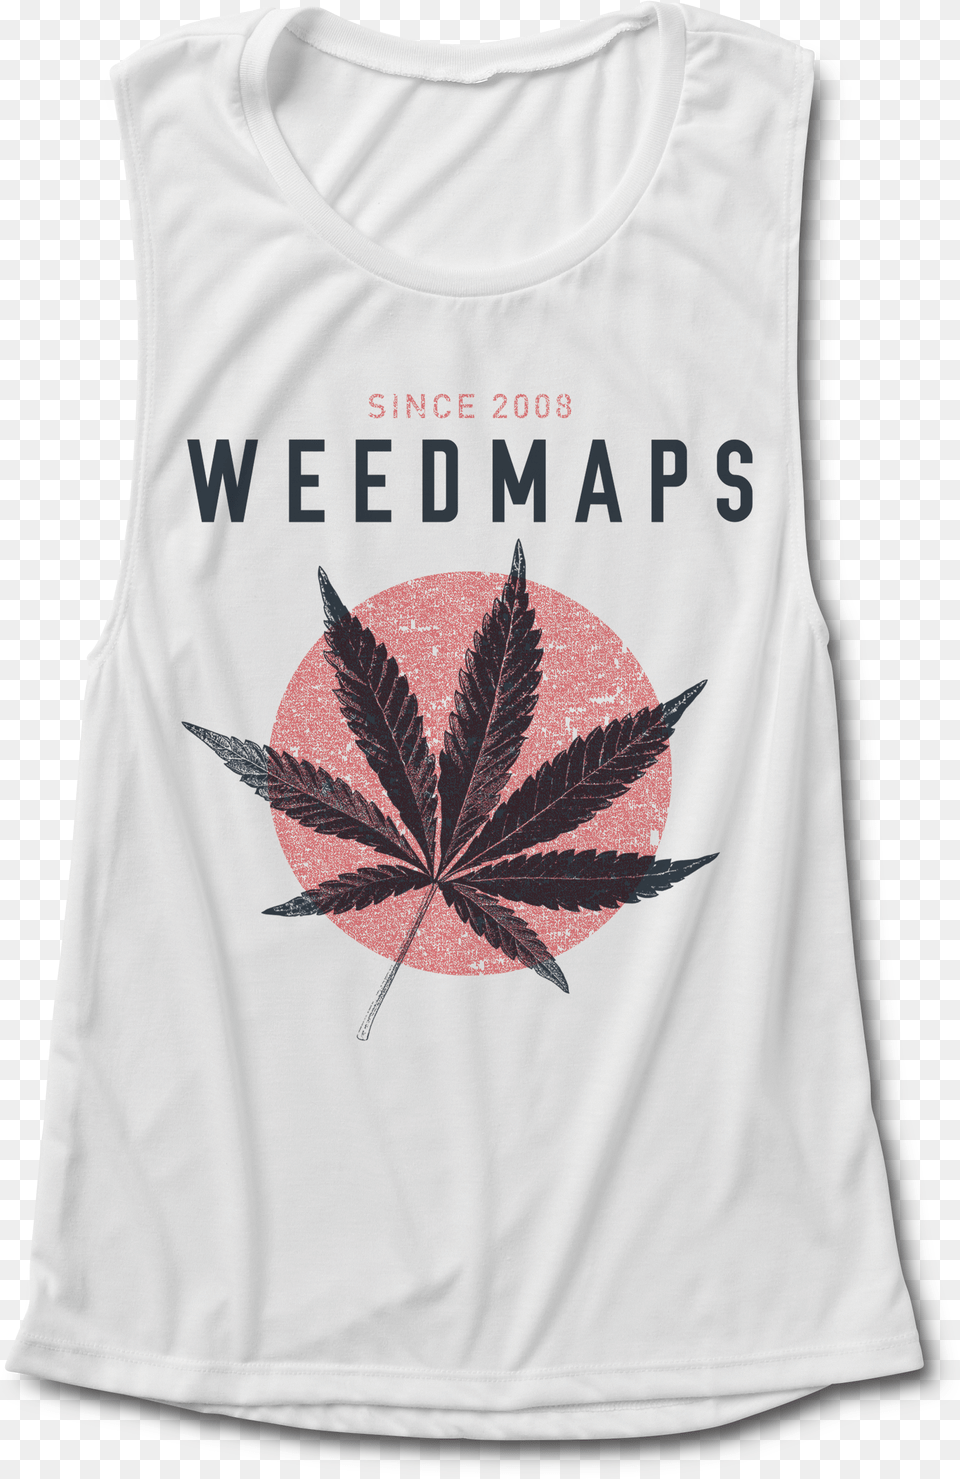 Find This Pin And More On Weedmaps Apparel By Weedmaps Wonder Tee Burnt Russet L Png Image